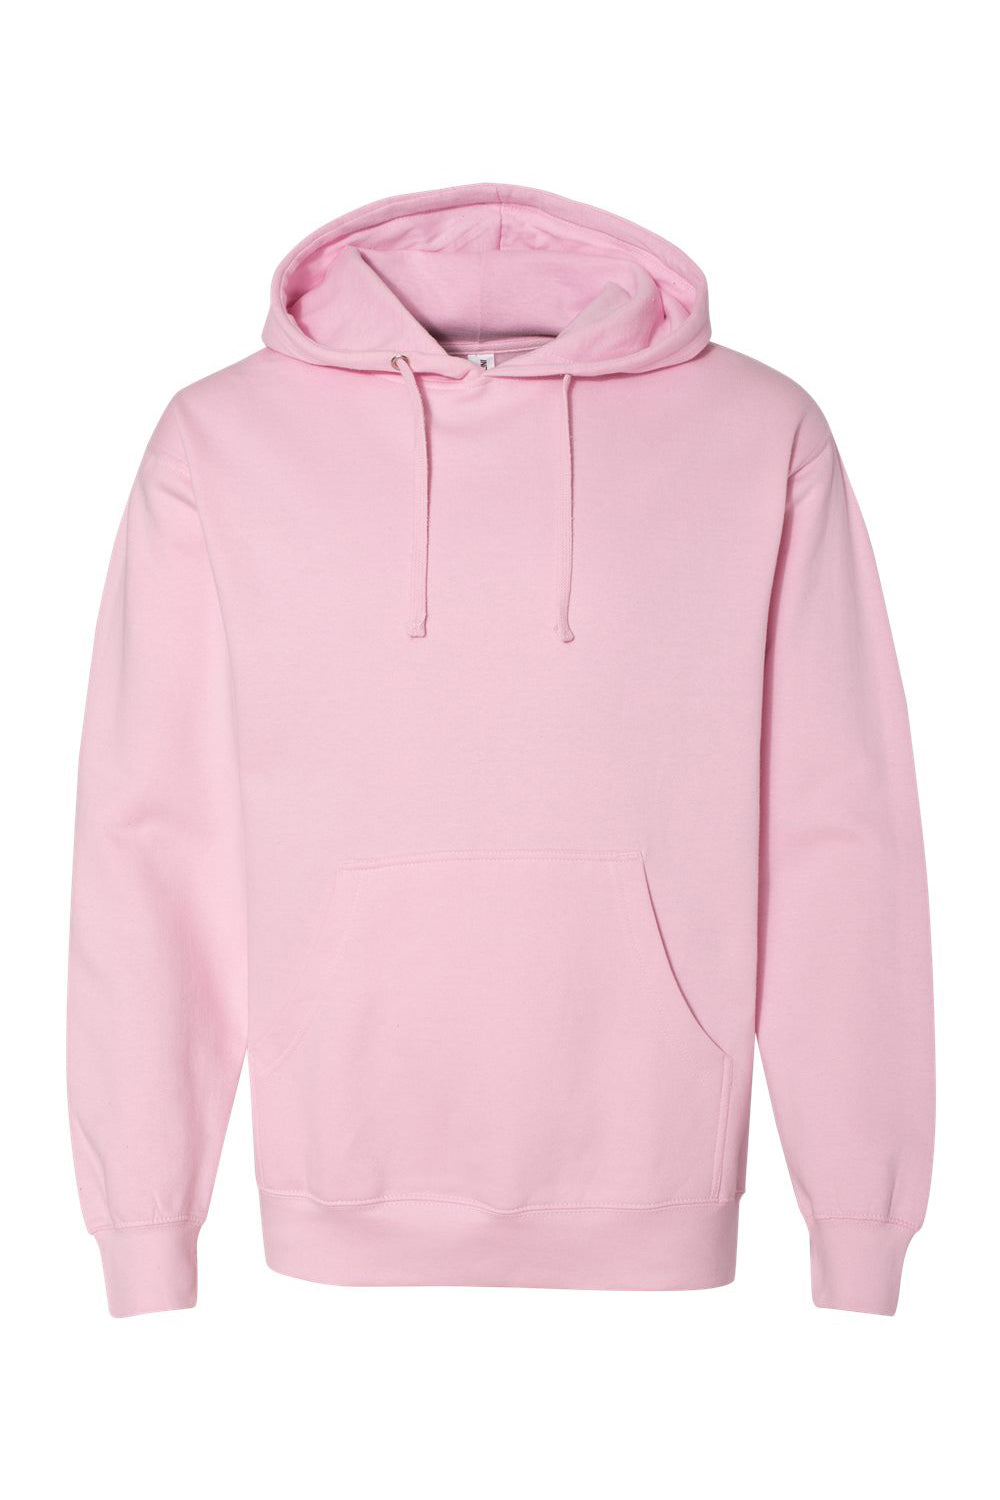 Independent Trading Co. SS4500 Mens Hooded Sweatshirt Hoodie Light Pink Flat Front